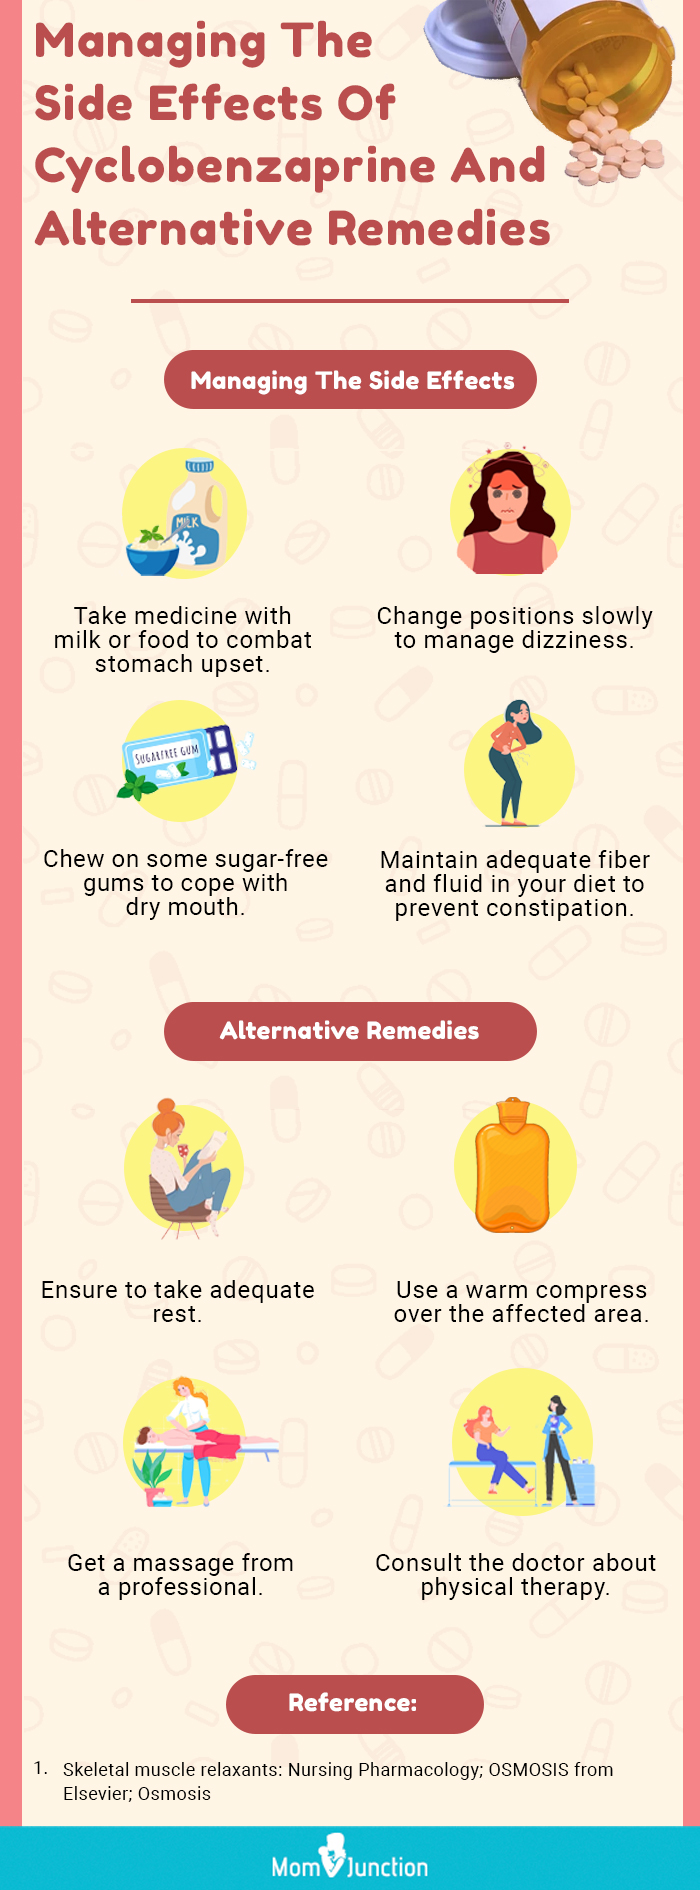 https://cdn2.momjunction.com/wp-content/uploads/2023/02/Managing-The-Side-Effects-Of-Cyclobenzaprine-And-Alternative-Remedies.jpg